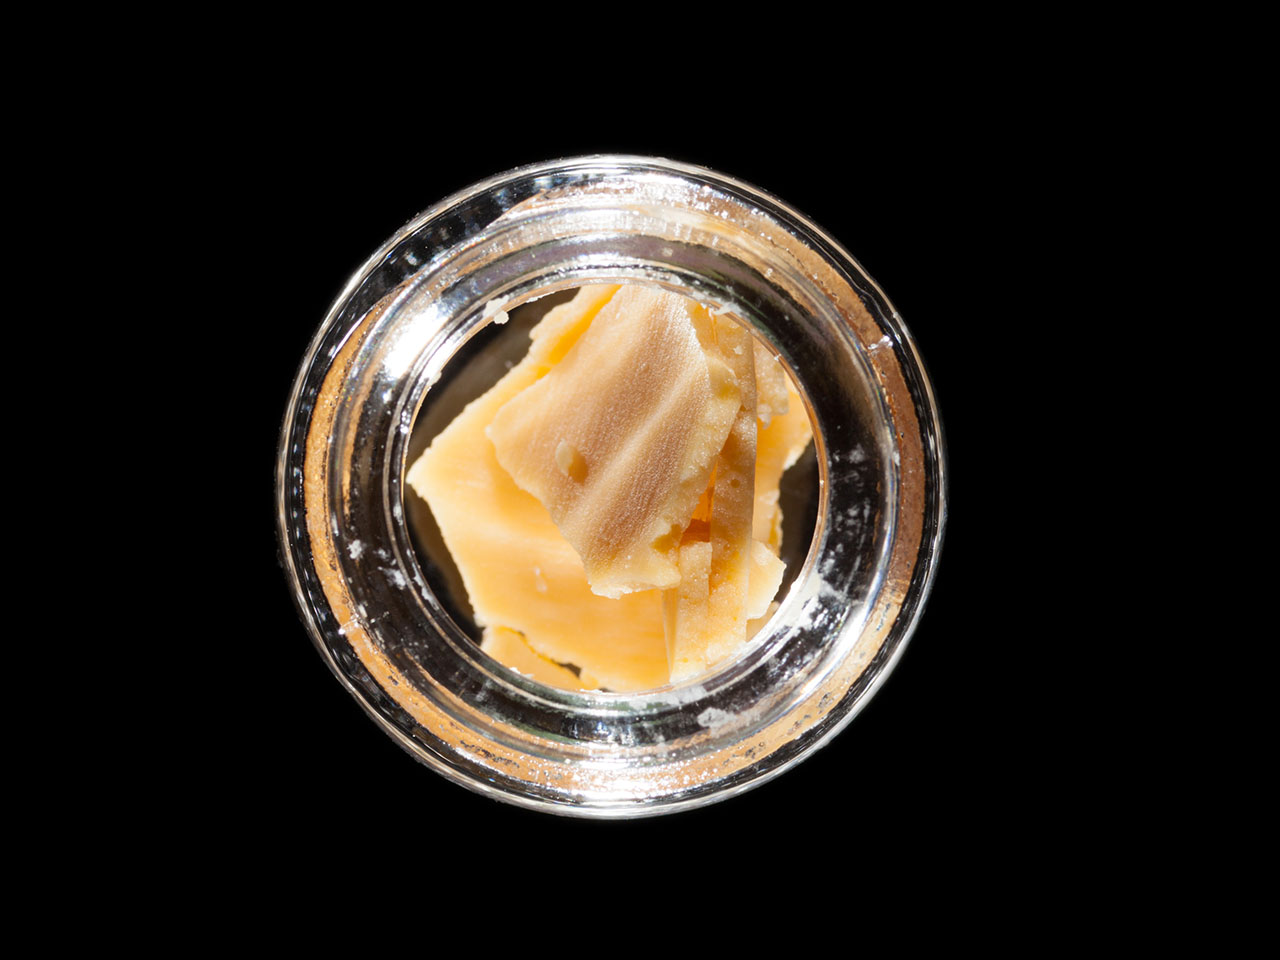 2016 NorCal Medical Cannabis Cup, indica concentrates